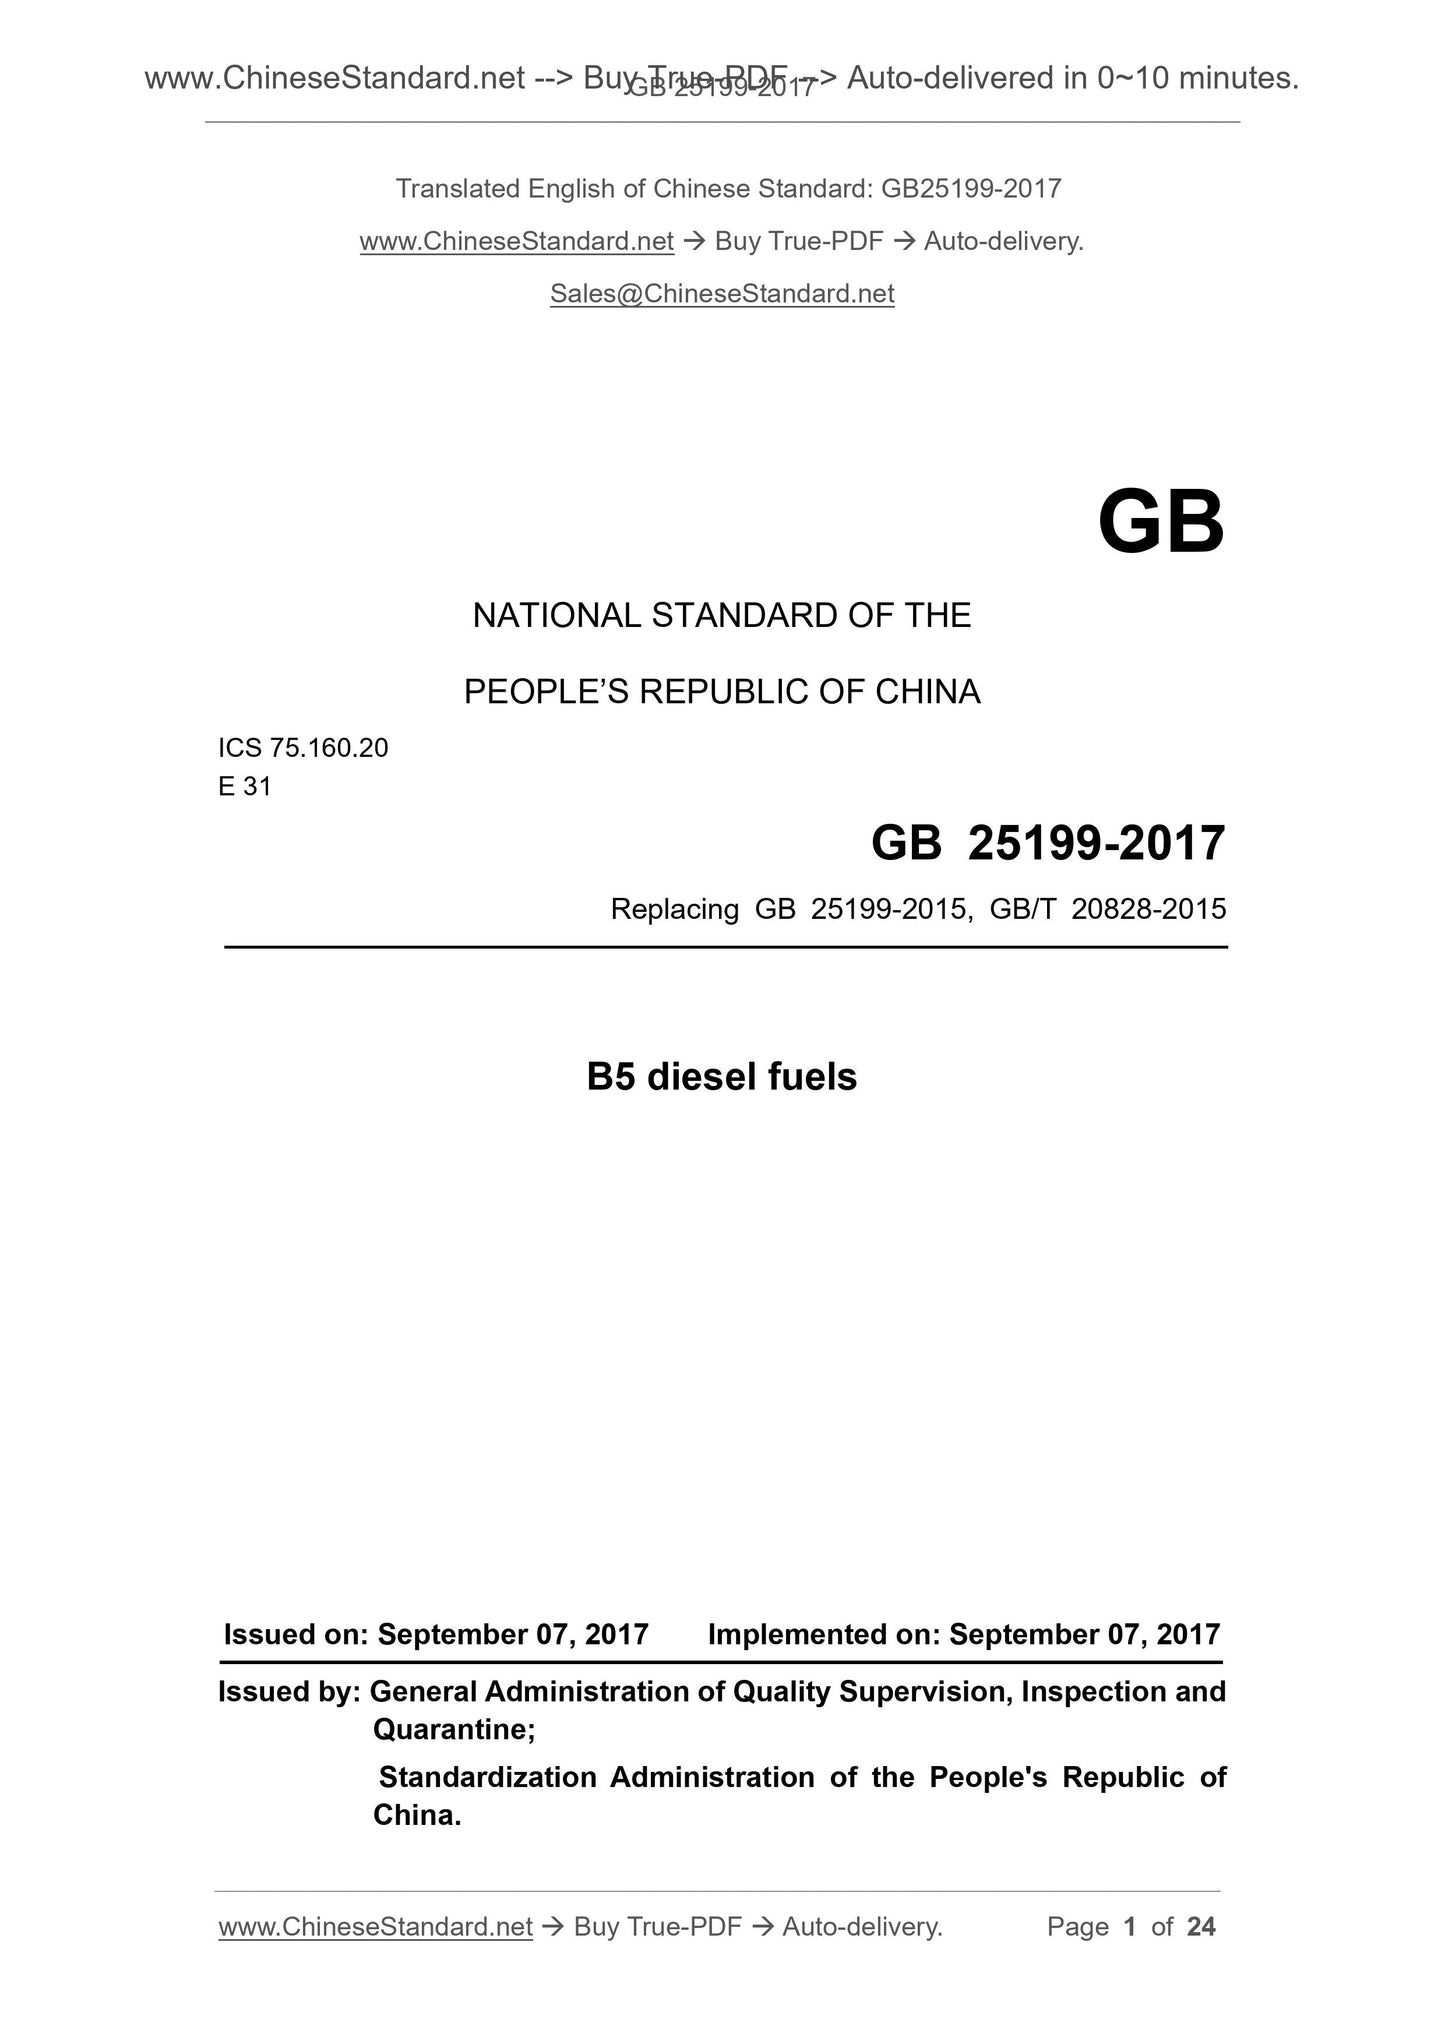 GB 25199-2017 Page 1